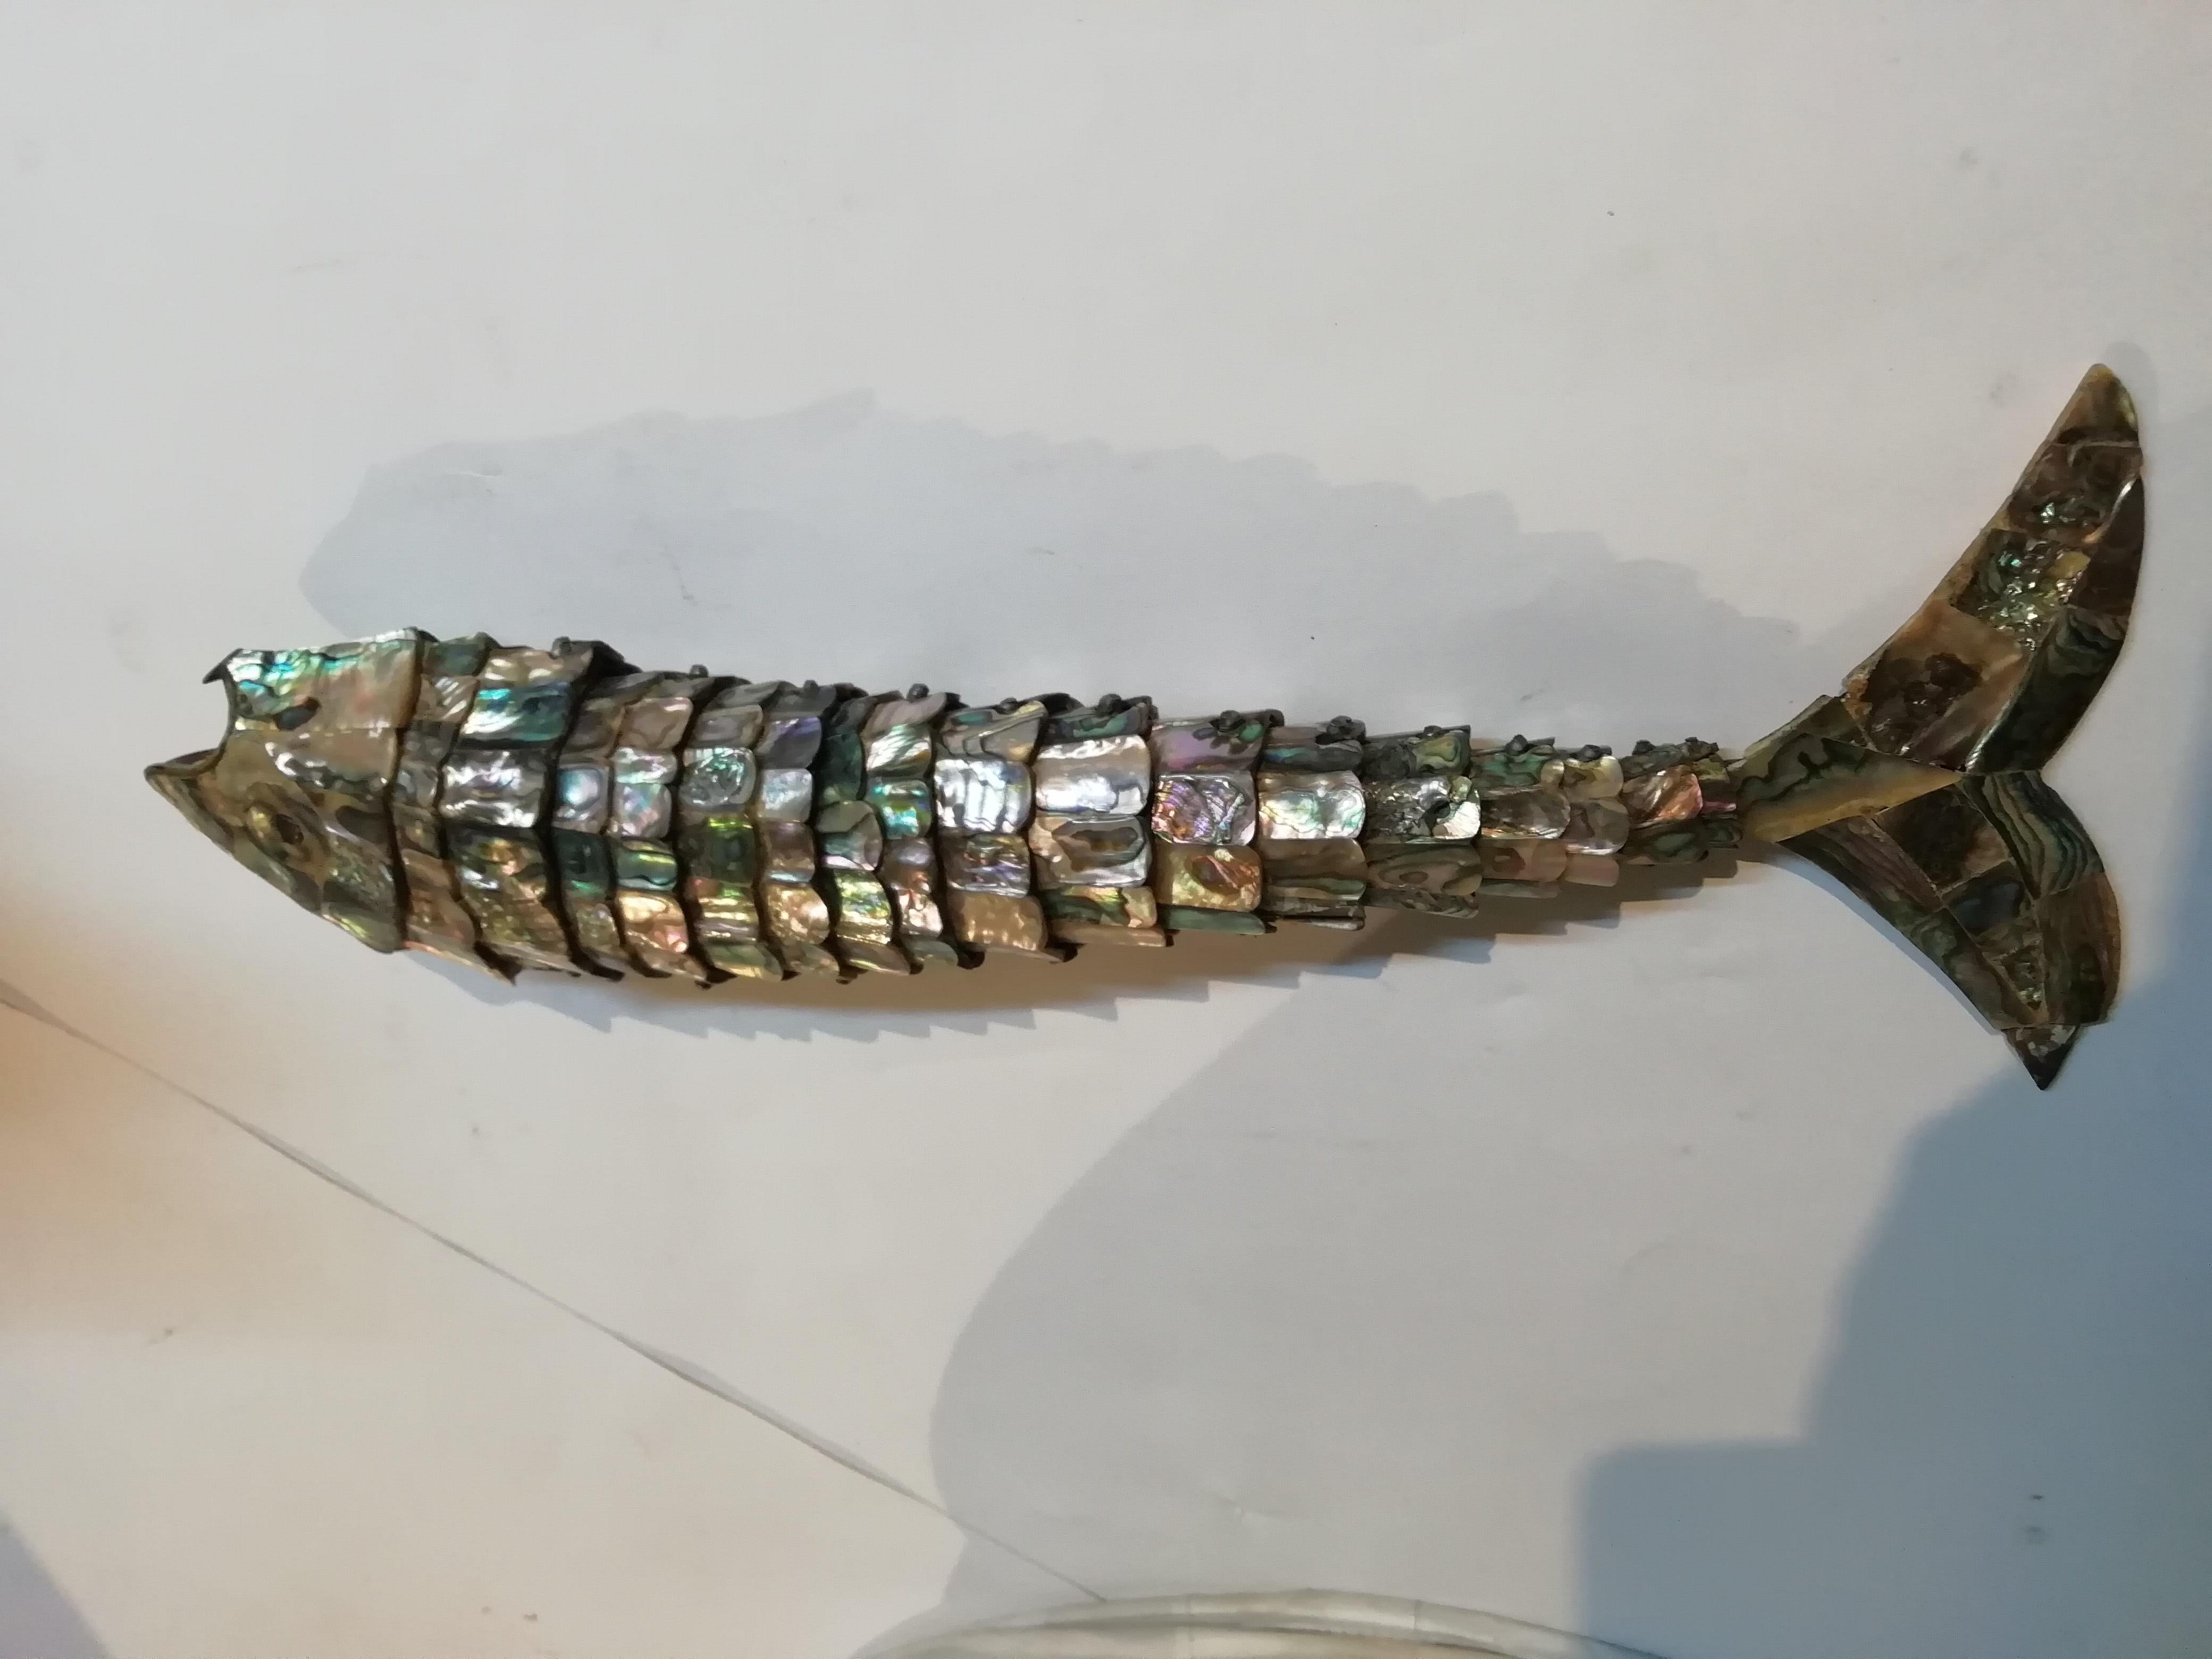 Mexican Mid-Century Modern abalone shell and brass articulated fish by Los Castillo. Taxco, México.